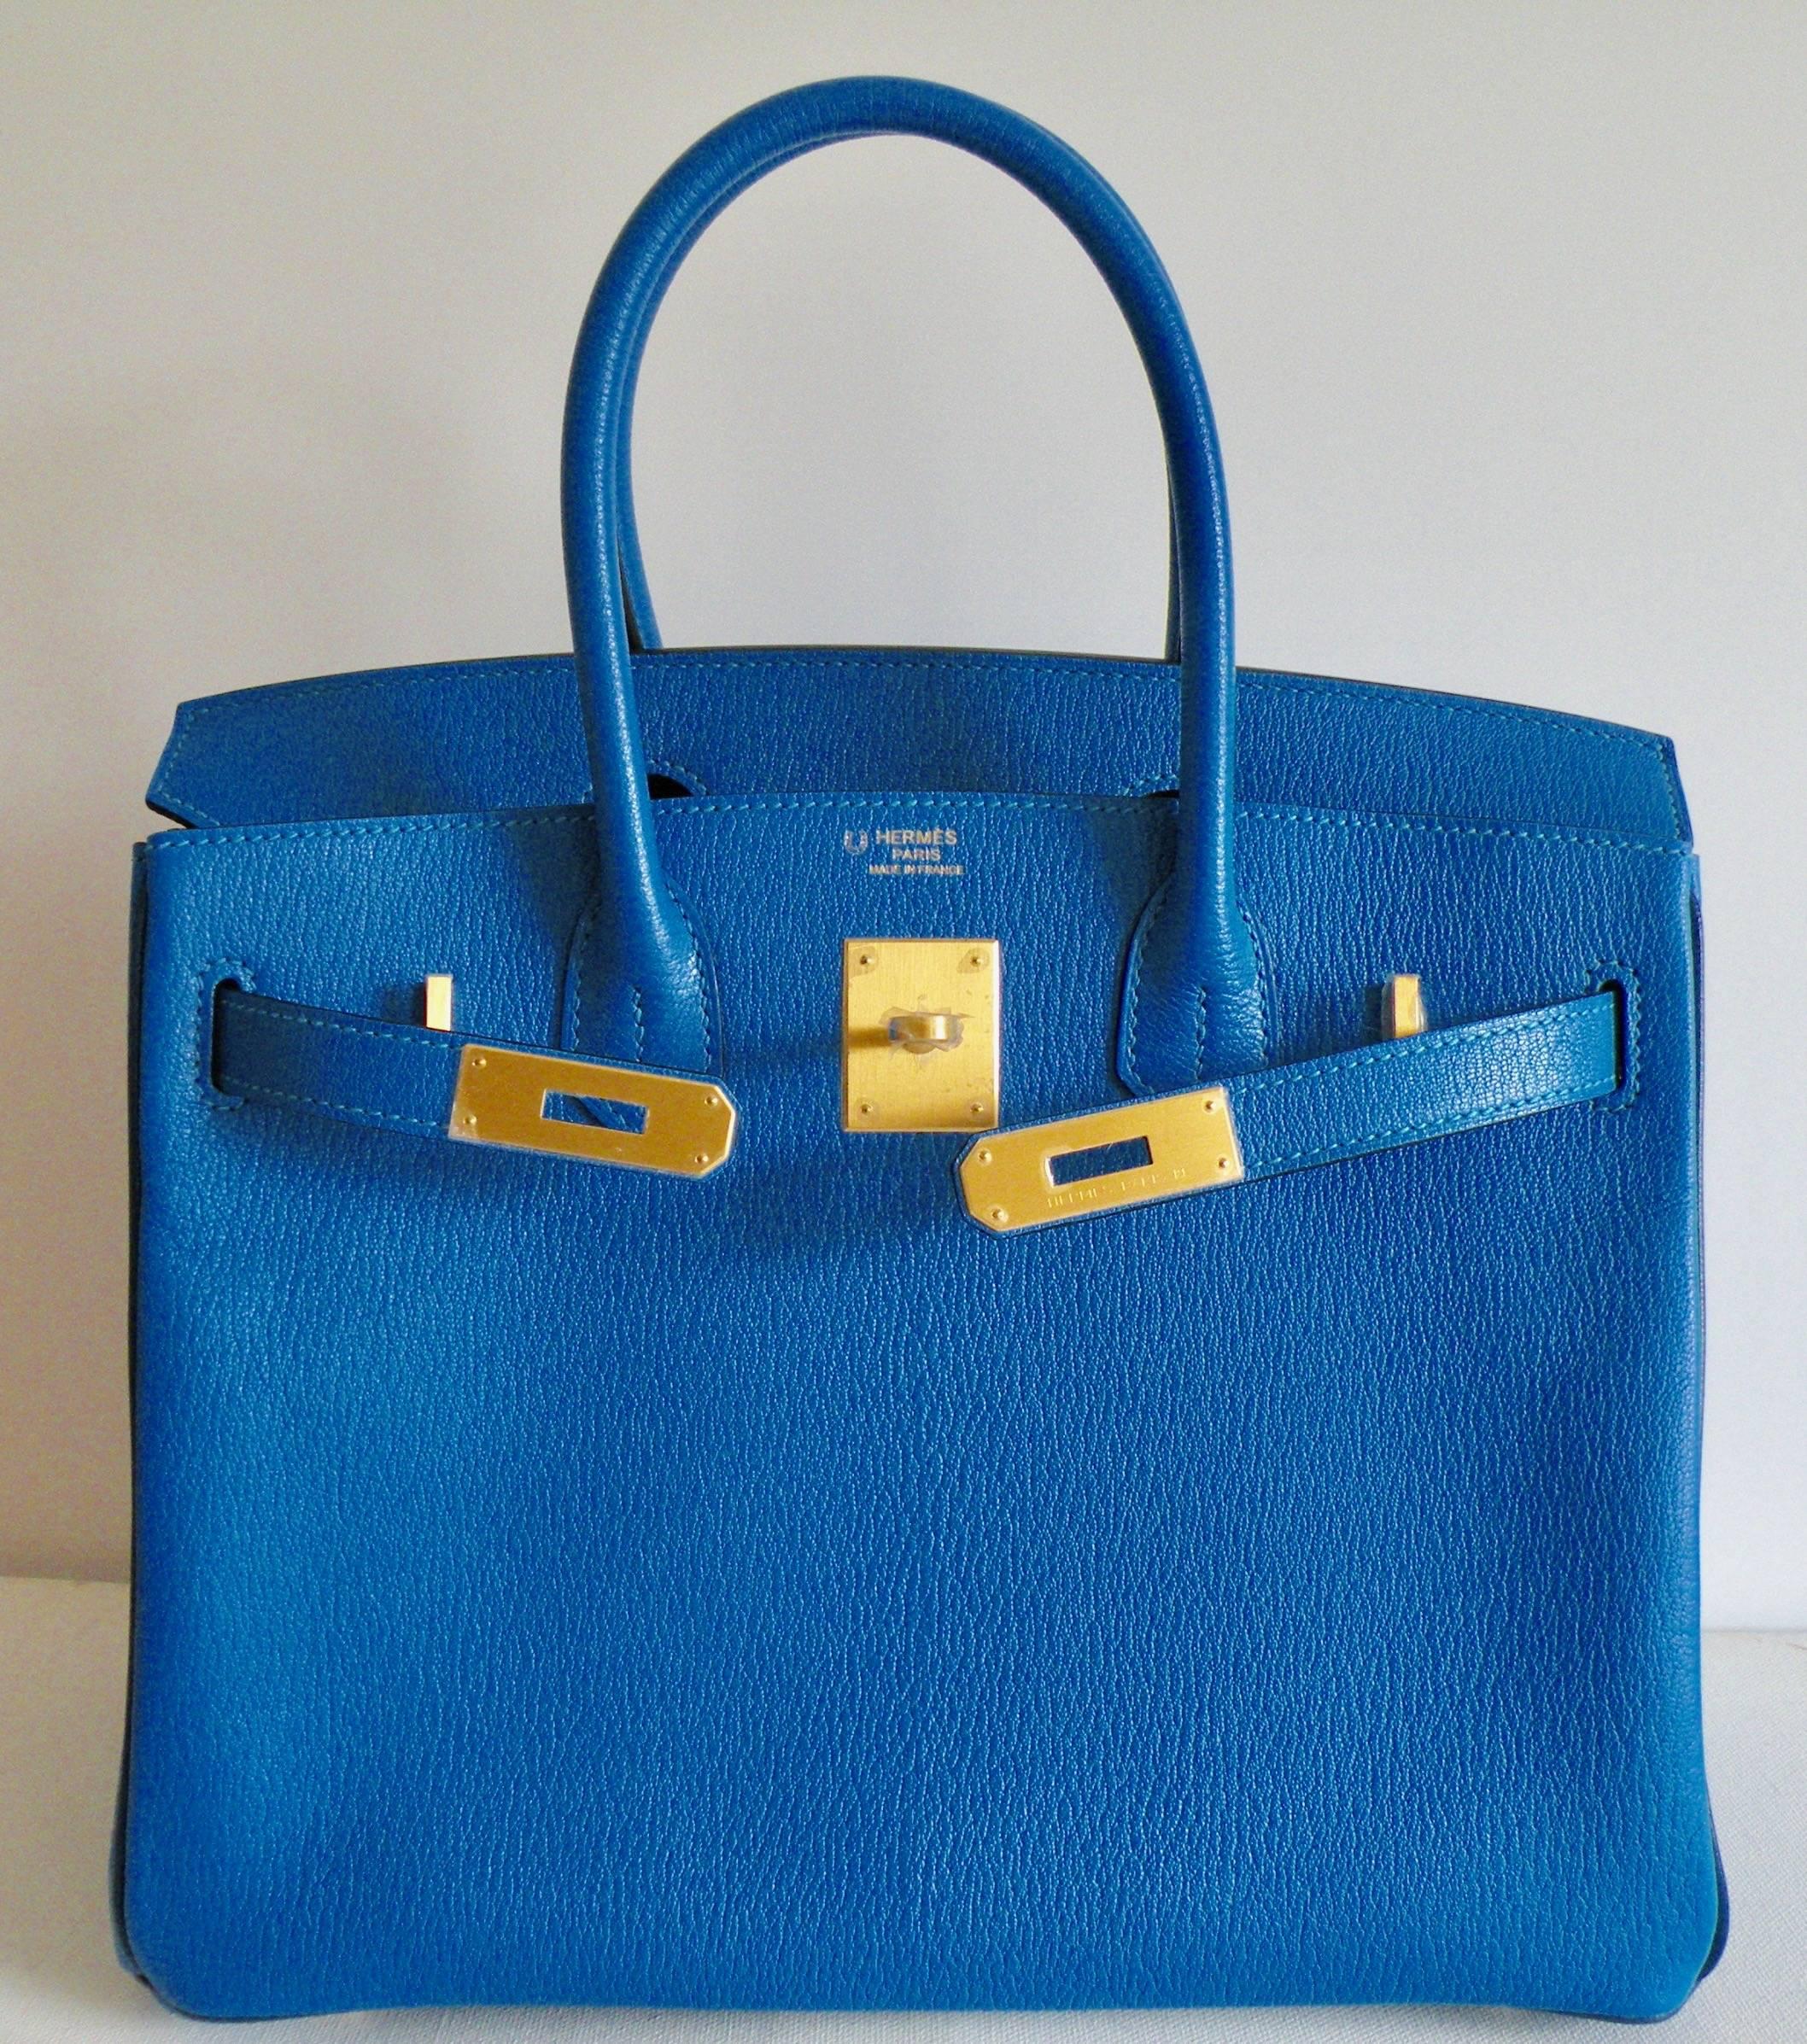 Hermès
30cm Birkin Bag
Special Order for VIP Client
Color: Blue Hydra and Blue Saphire
Very Rare Chevre!
This special order bag, was ordered in Chevre! Very rare to find , and most desired leather for its beauty and durability.

The outside of the